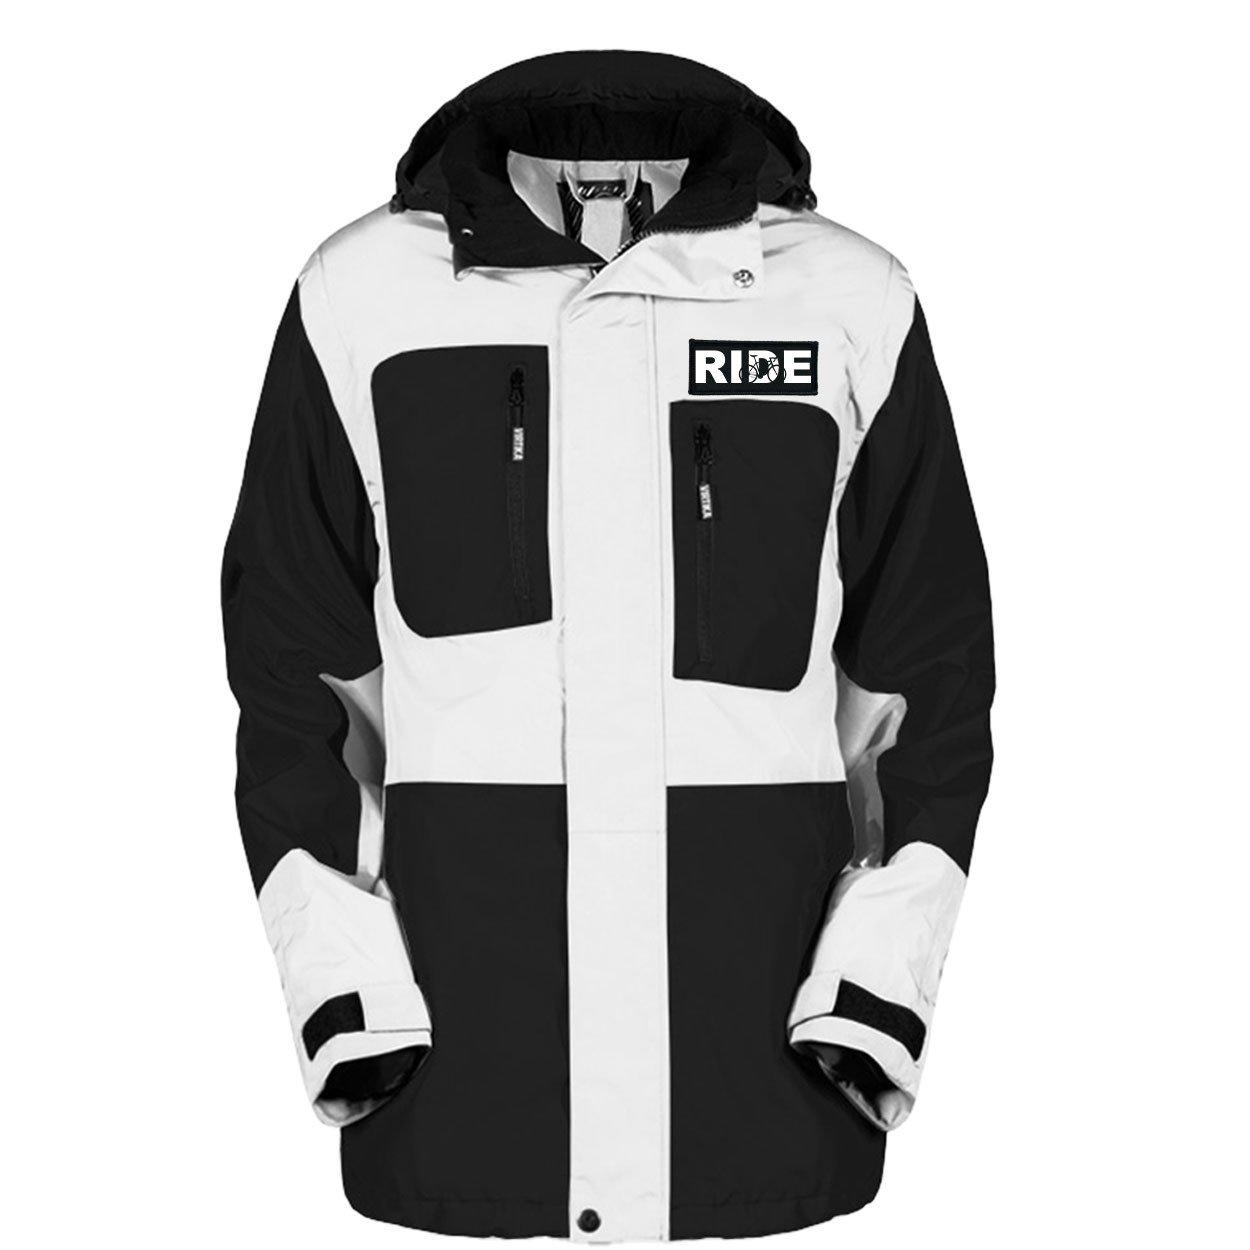 Ride Cycle Logo Classic Woven Patch Pro Snowboard Jacket (Black/White)